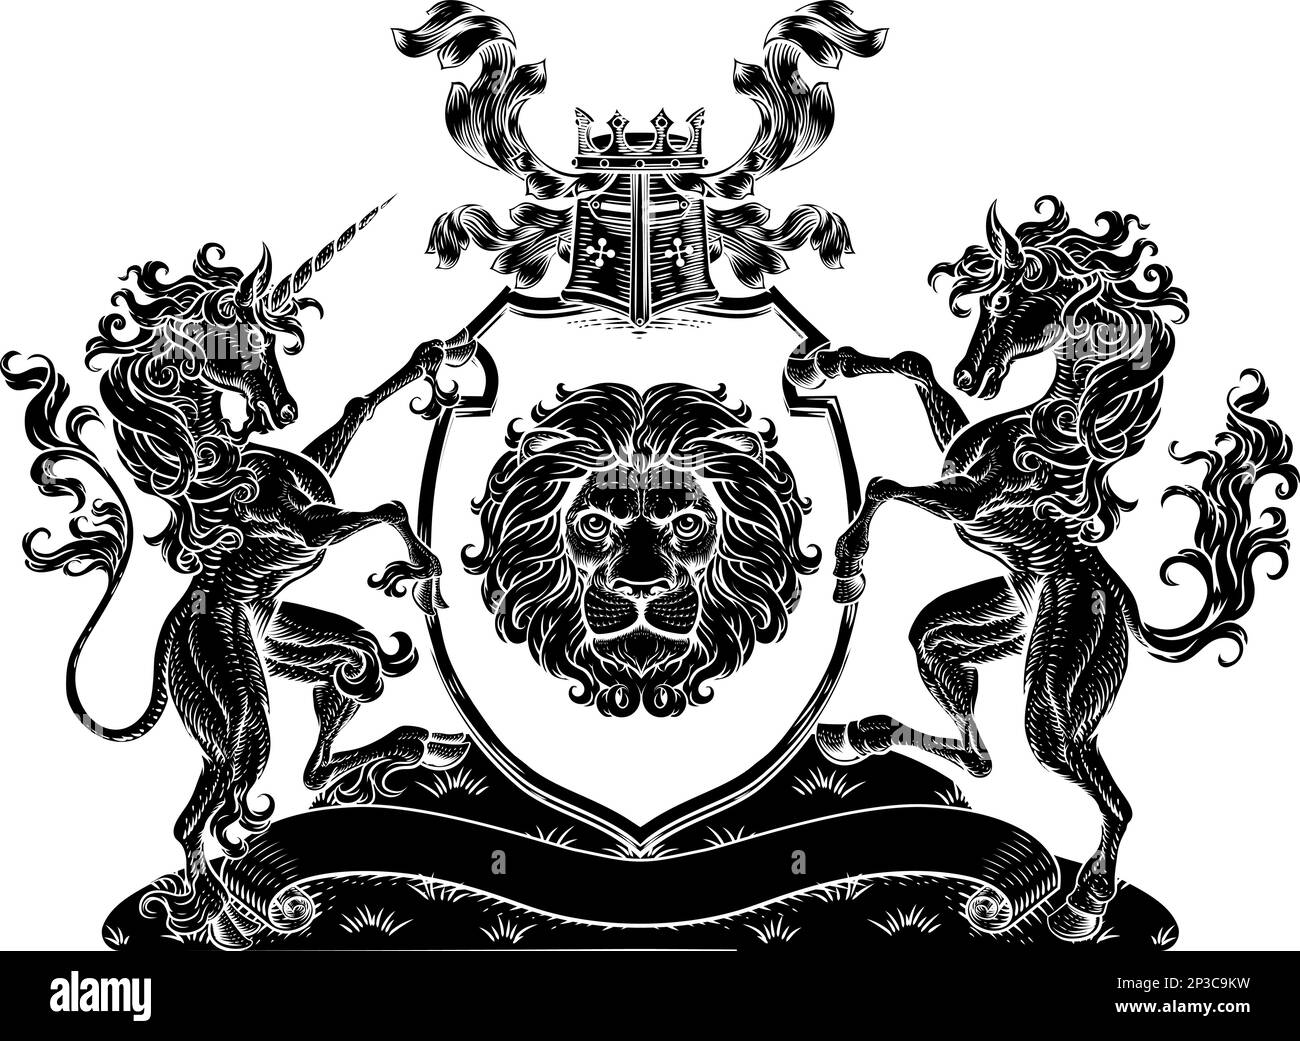 Crest Unicorn Horse Coat of Arms Lion Shield Seal Stock Vector